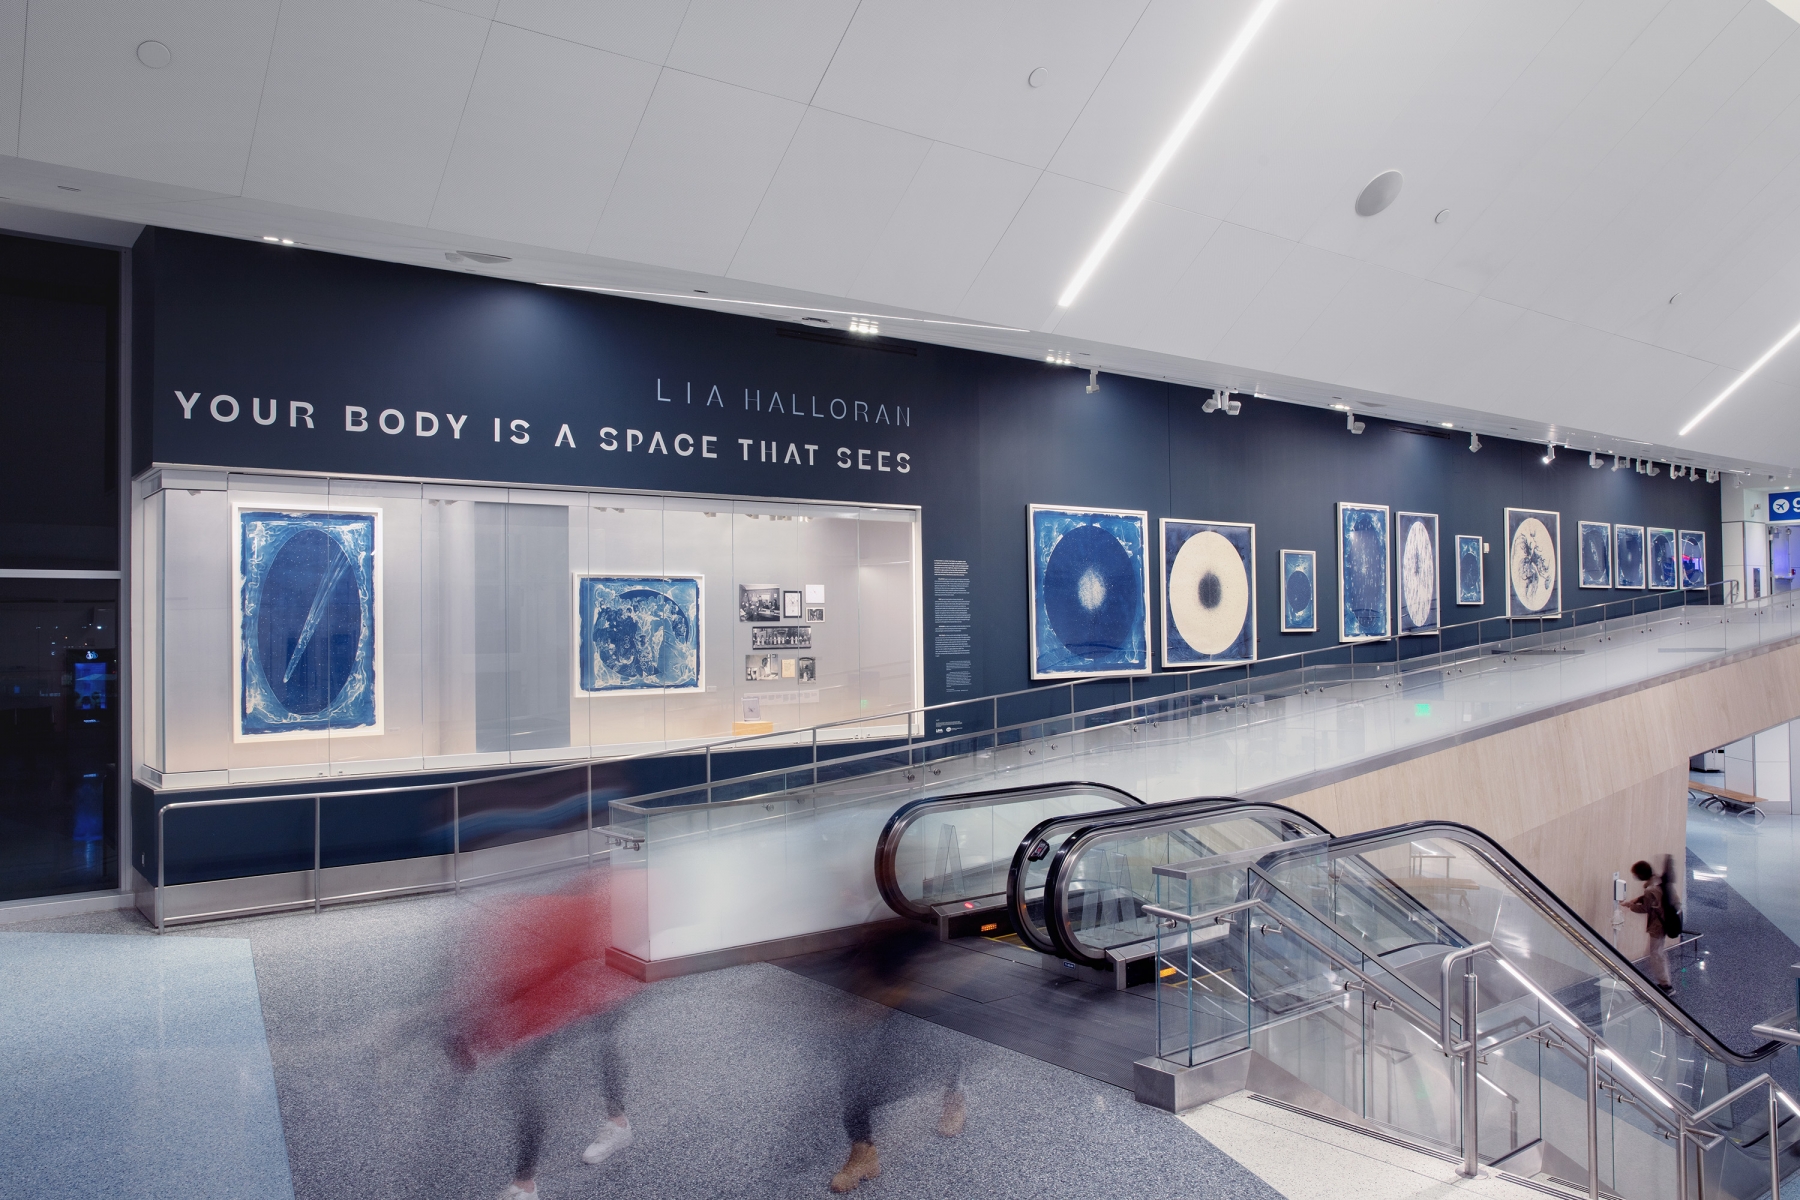 Installation view of Lia Halloran: Your Body is a Space that Sees at LAX Terminal 1.&nbsp;Photos courtesy of SKA Studios LLC.